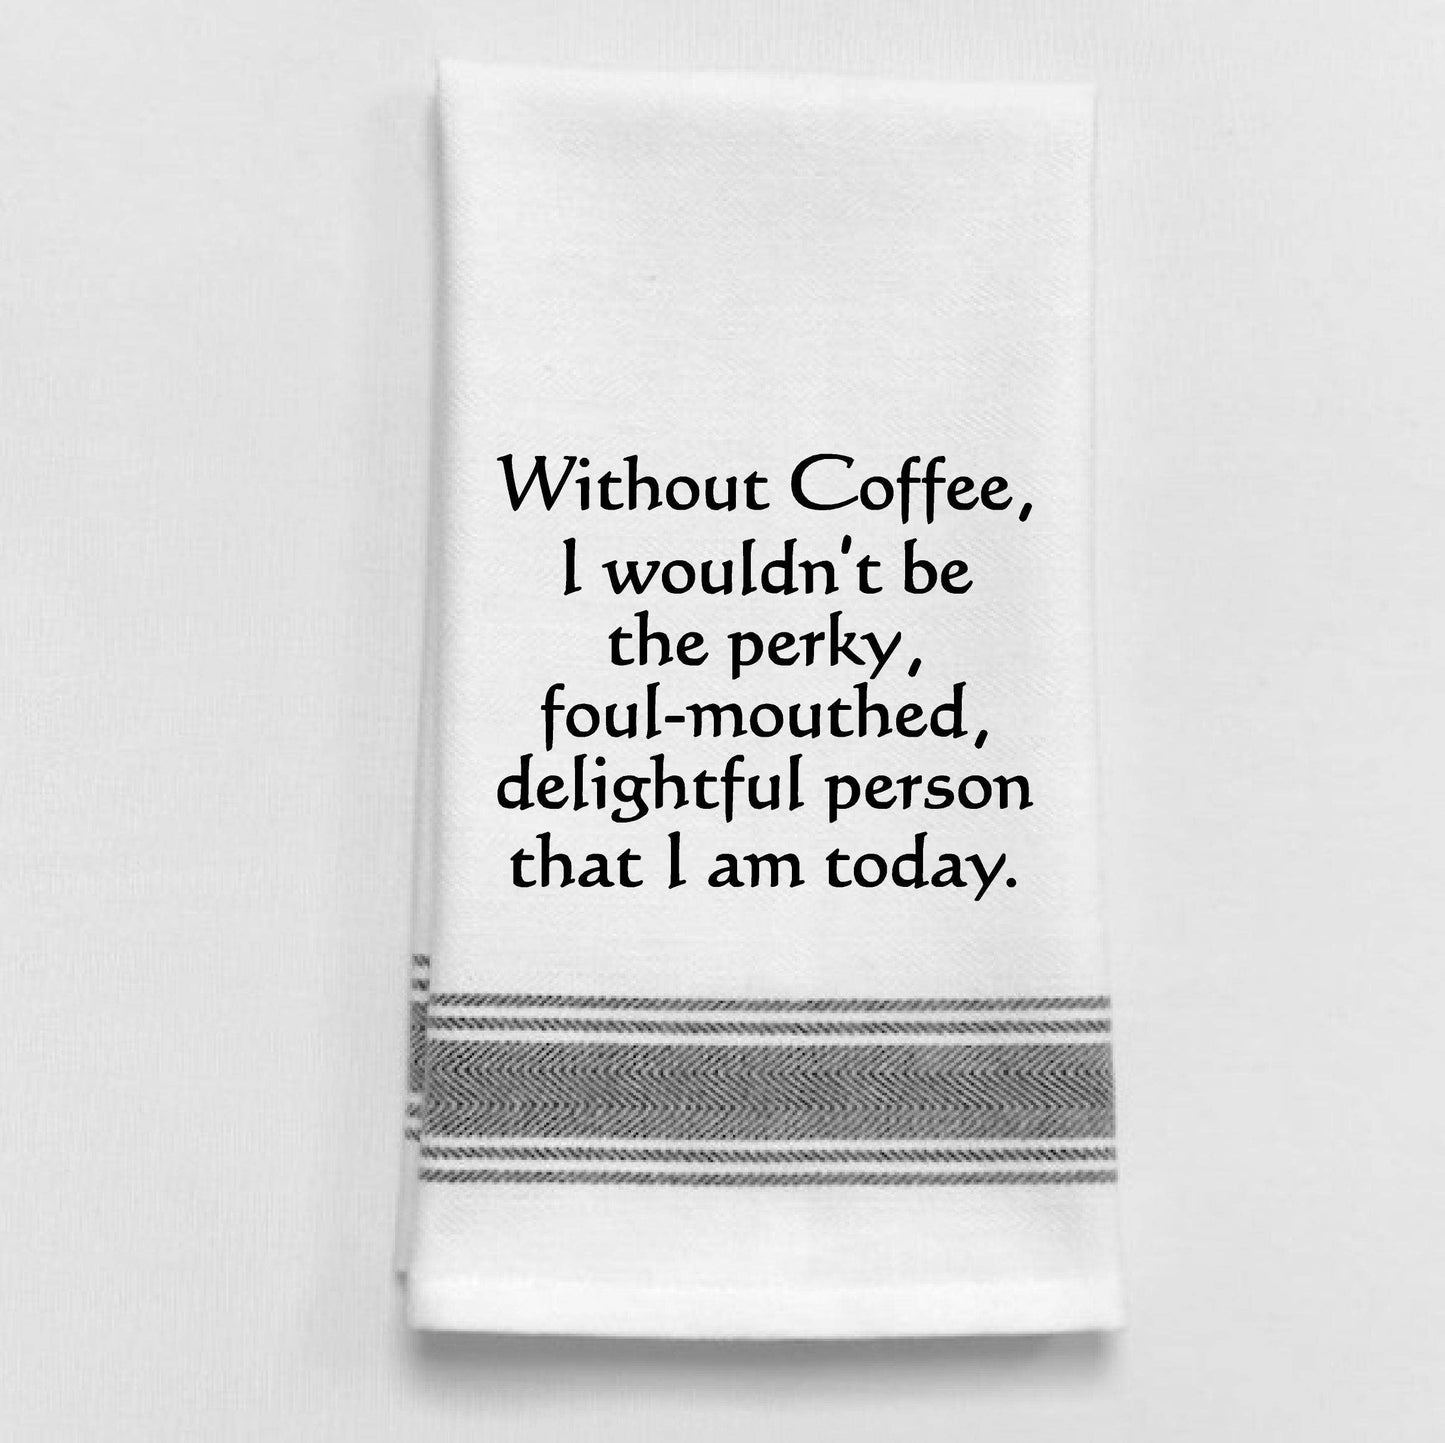 Without coffee, I wouldn't be...